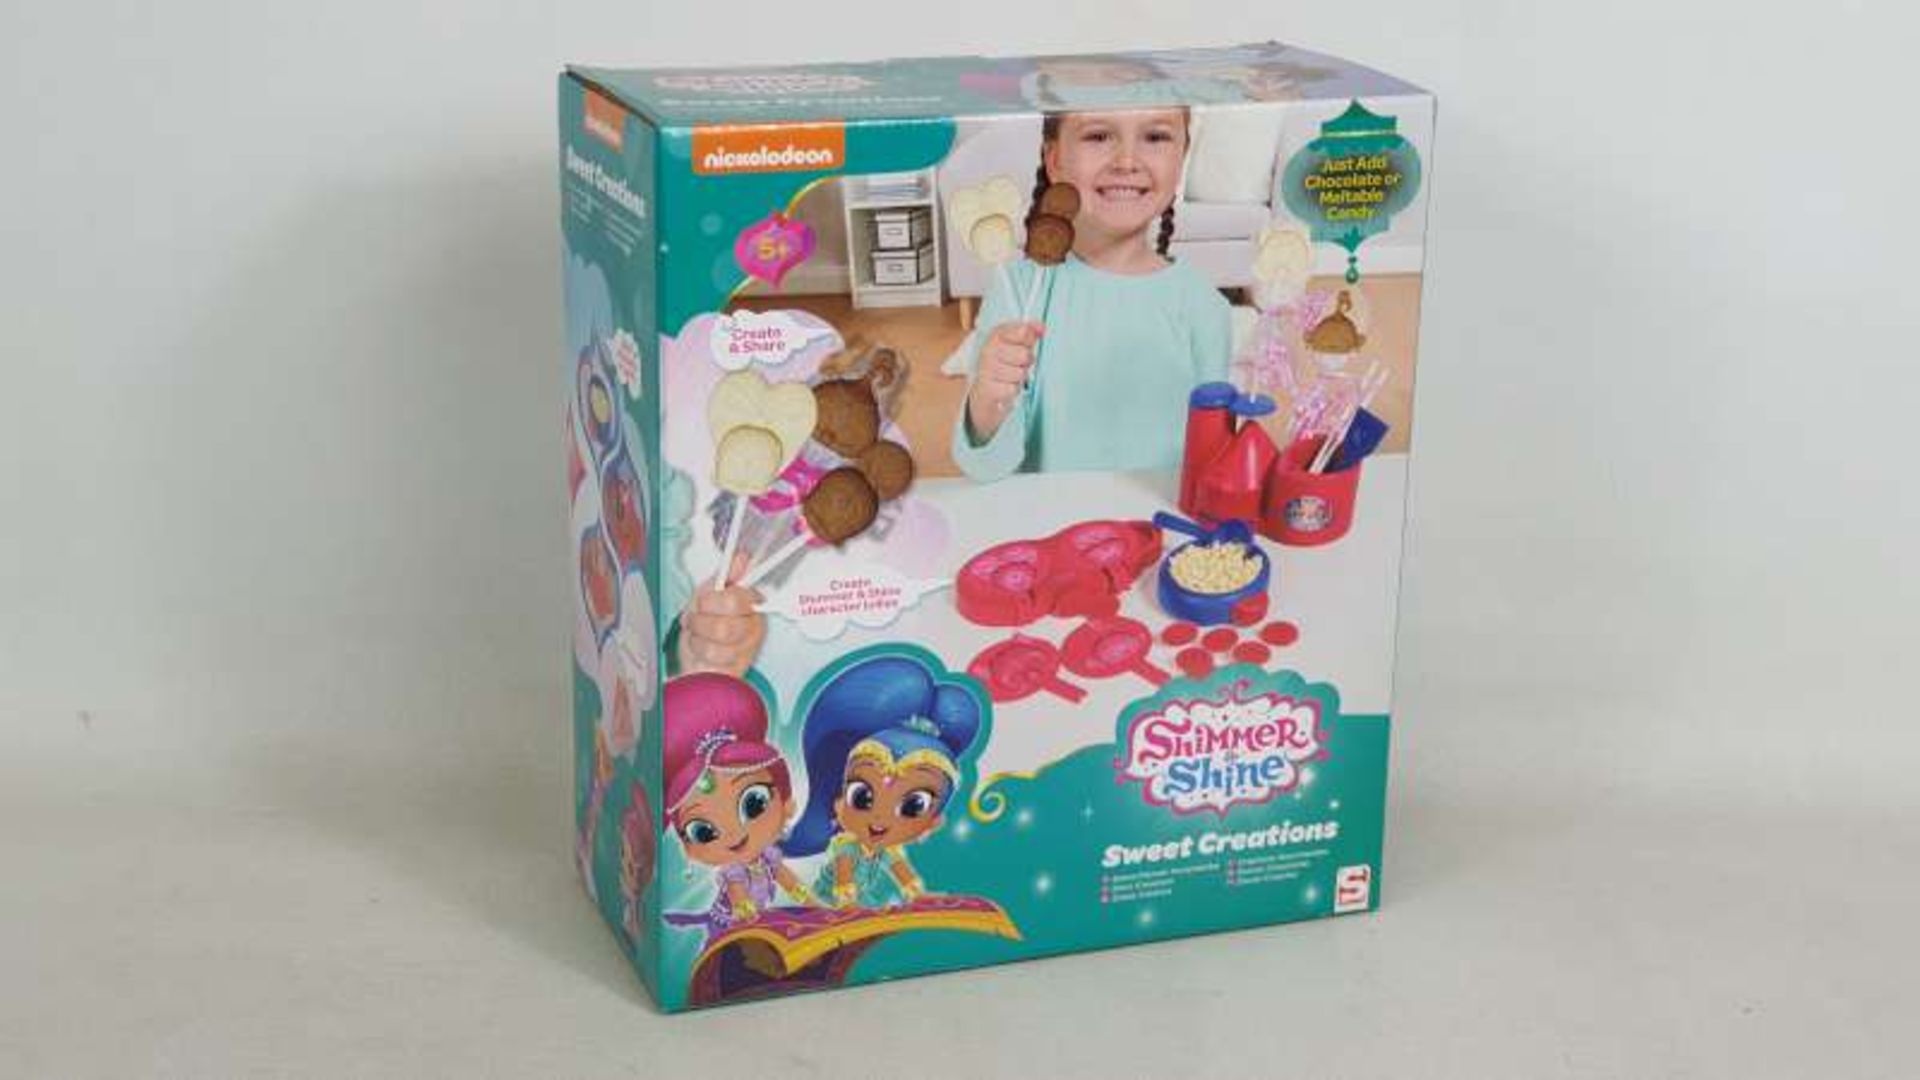 18 X BRAND NEW BOXED SHIMMER AND SHINE SWEET CREATIONS IN 3 BOXES